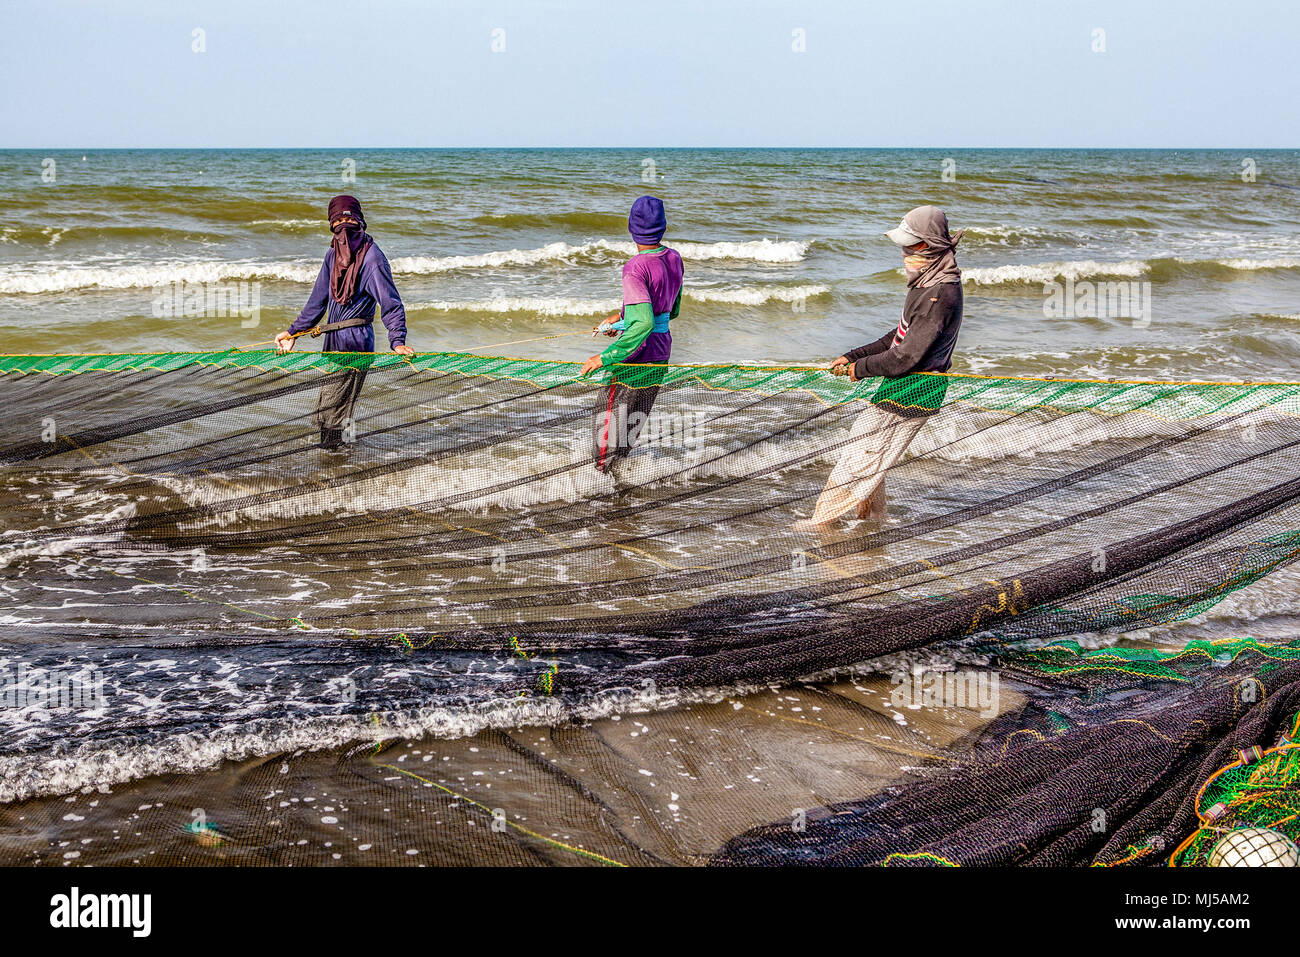 Fishermen from a local village near Baybay Beach set out and haul in their seine net twice a day to provide food and income for their families at Roxa Stock Photo